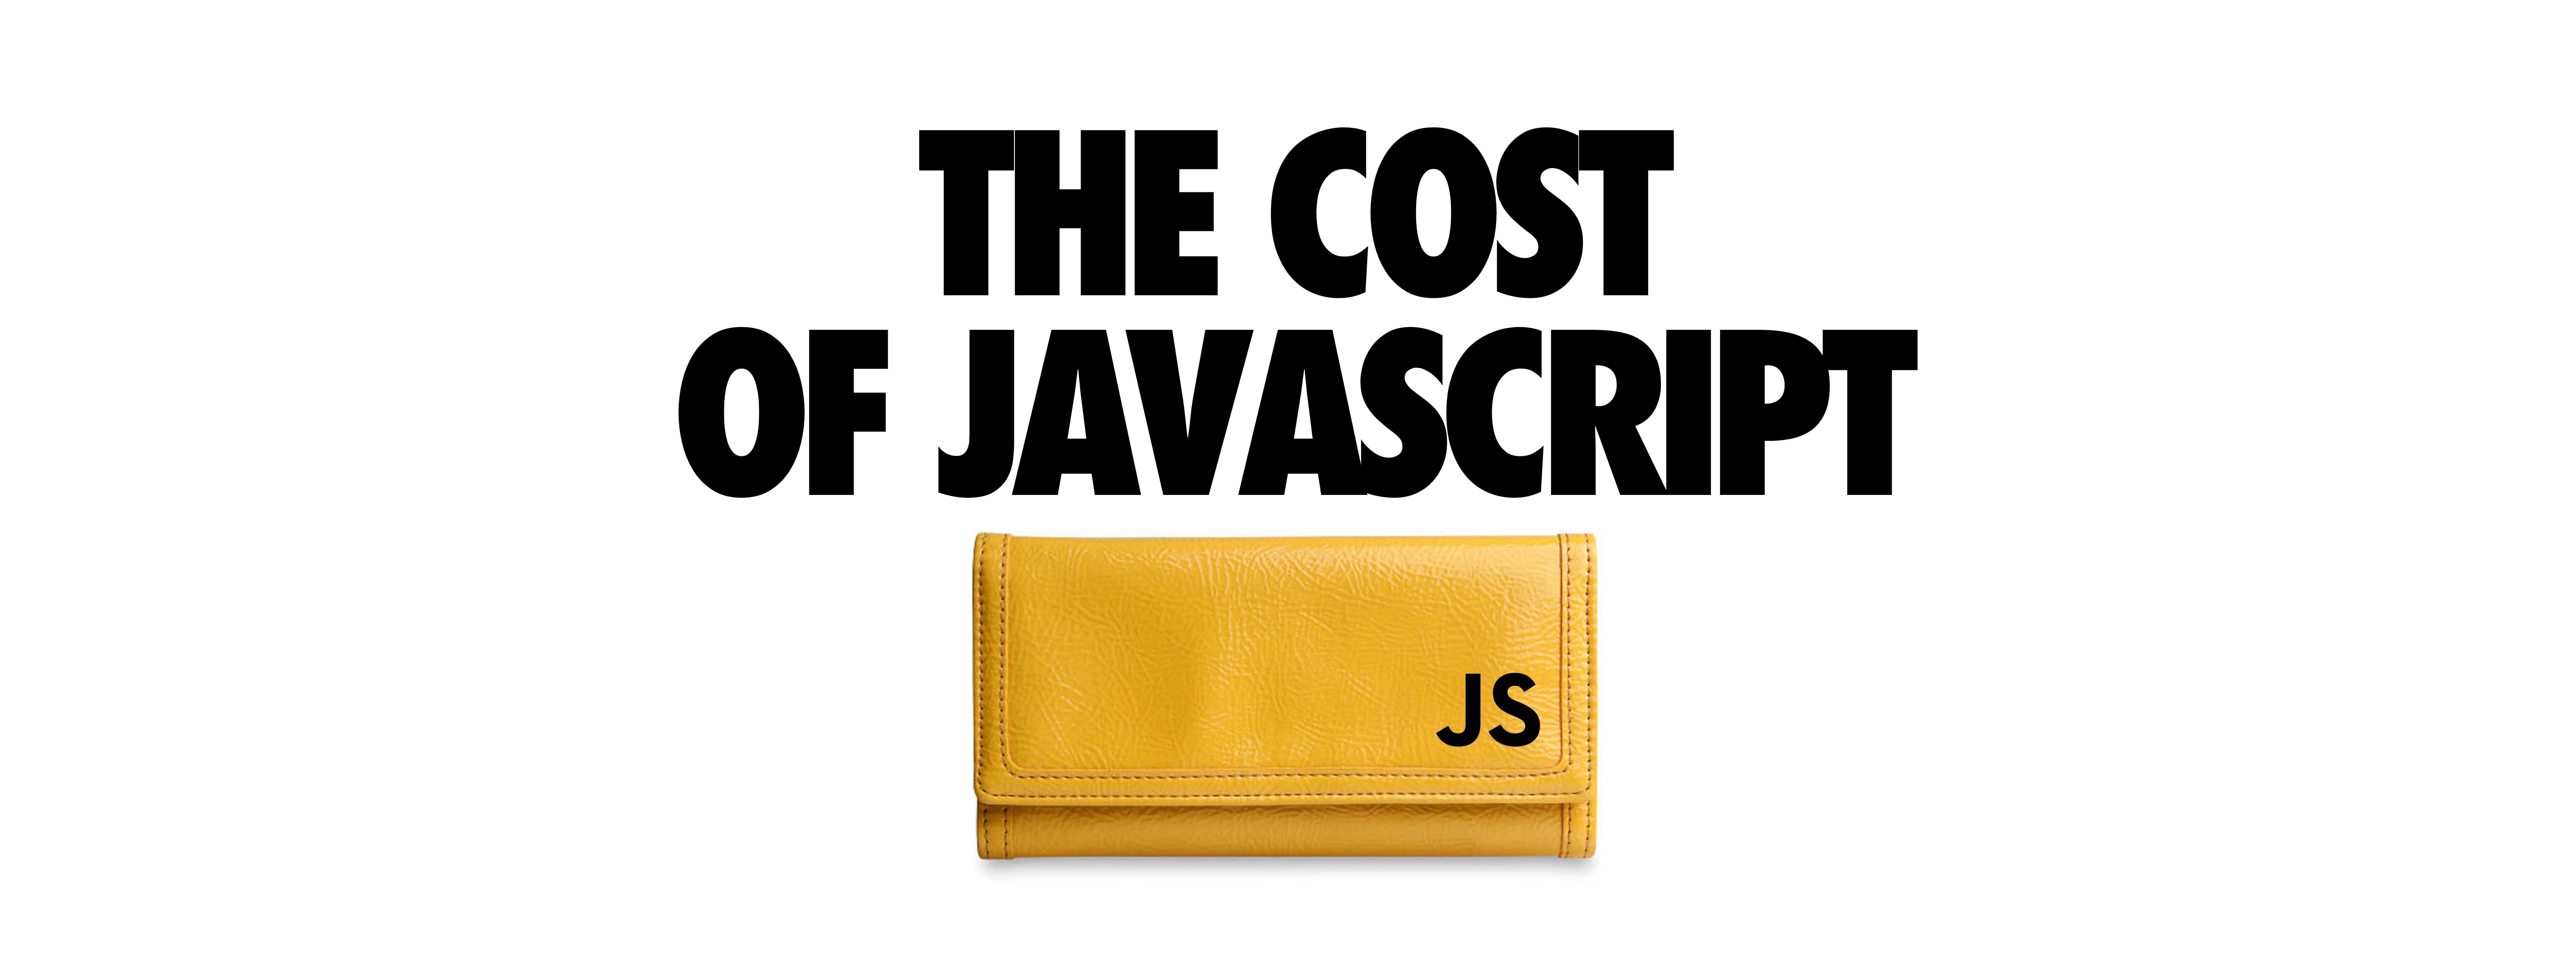 The Cost Of Javascript In 18 Update The Cost Of Javascript In 19 By Addy Osmani Medium